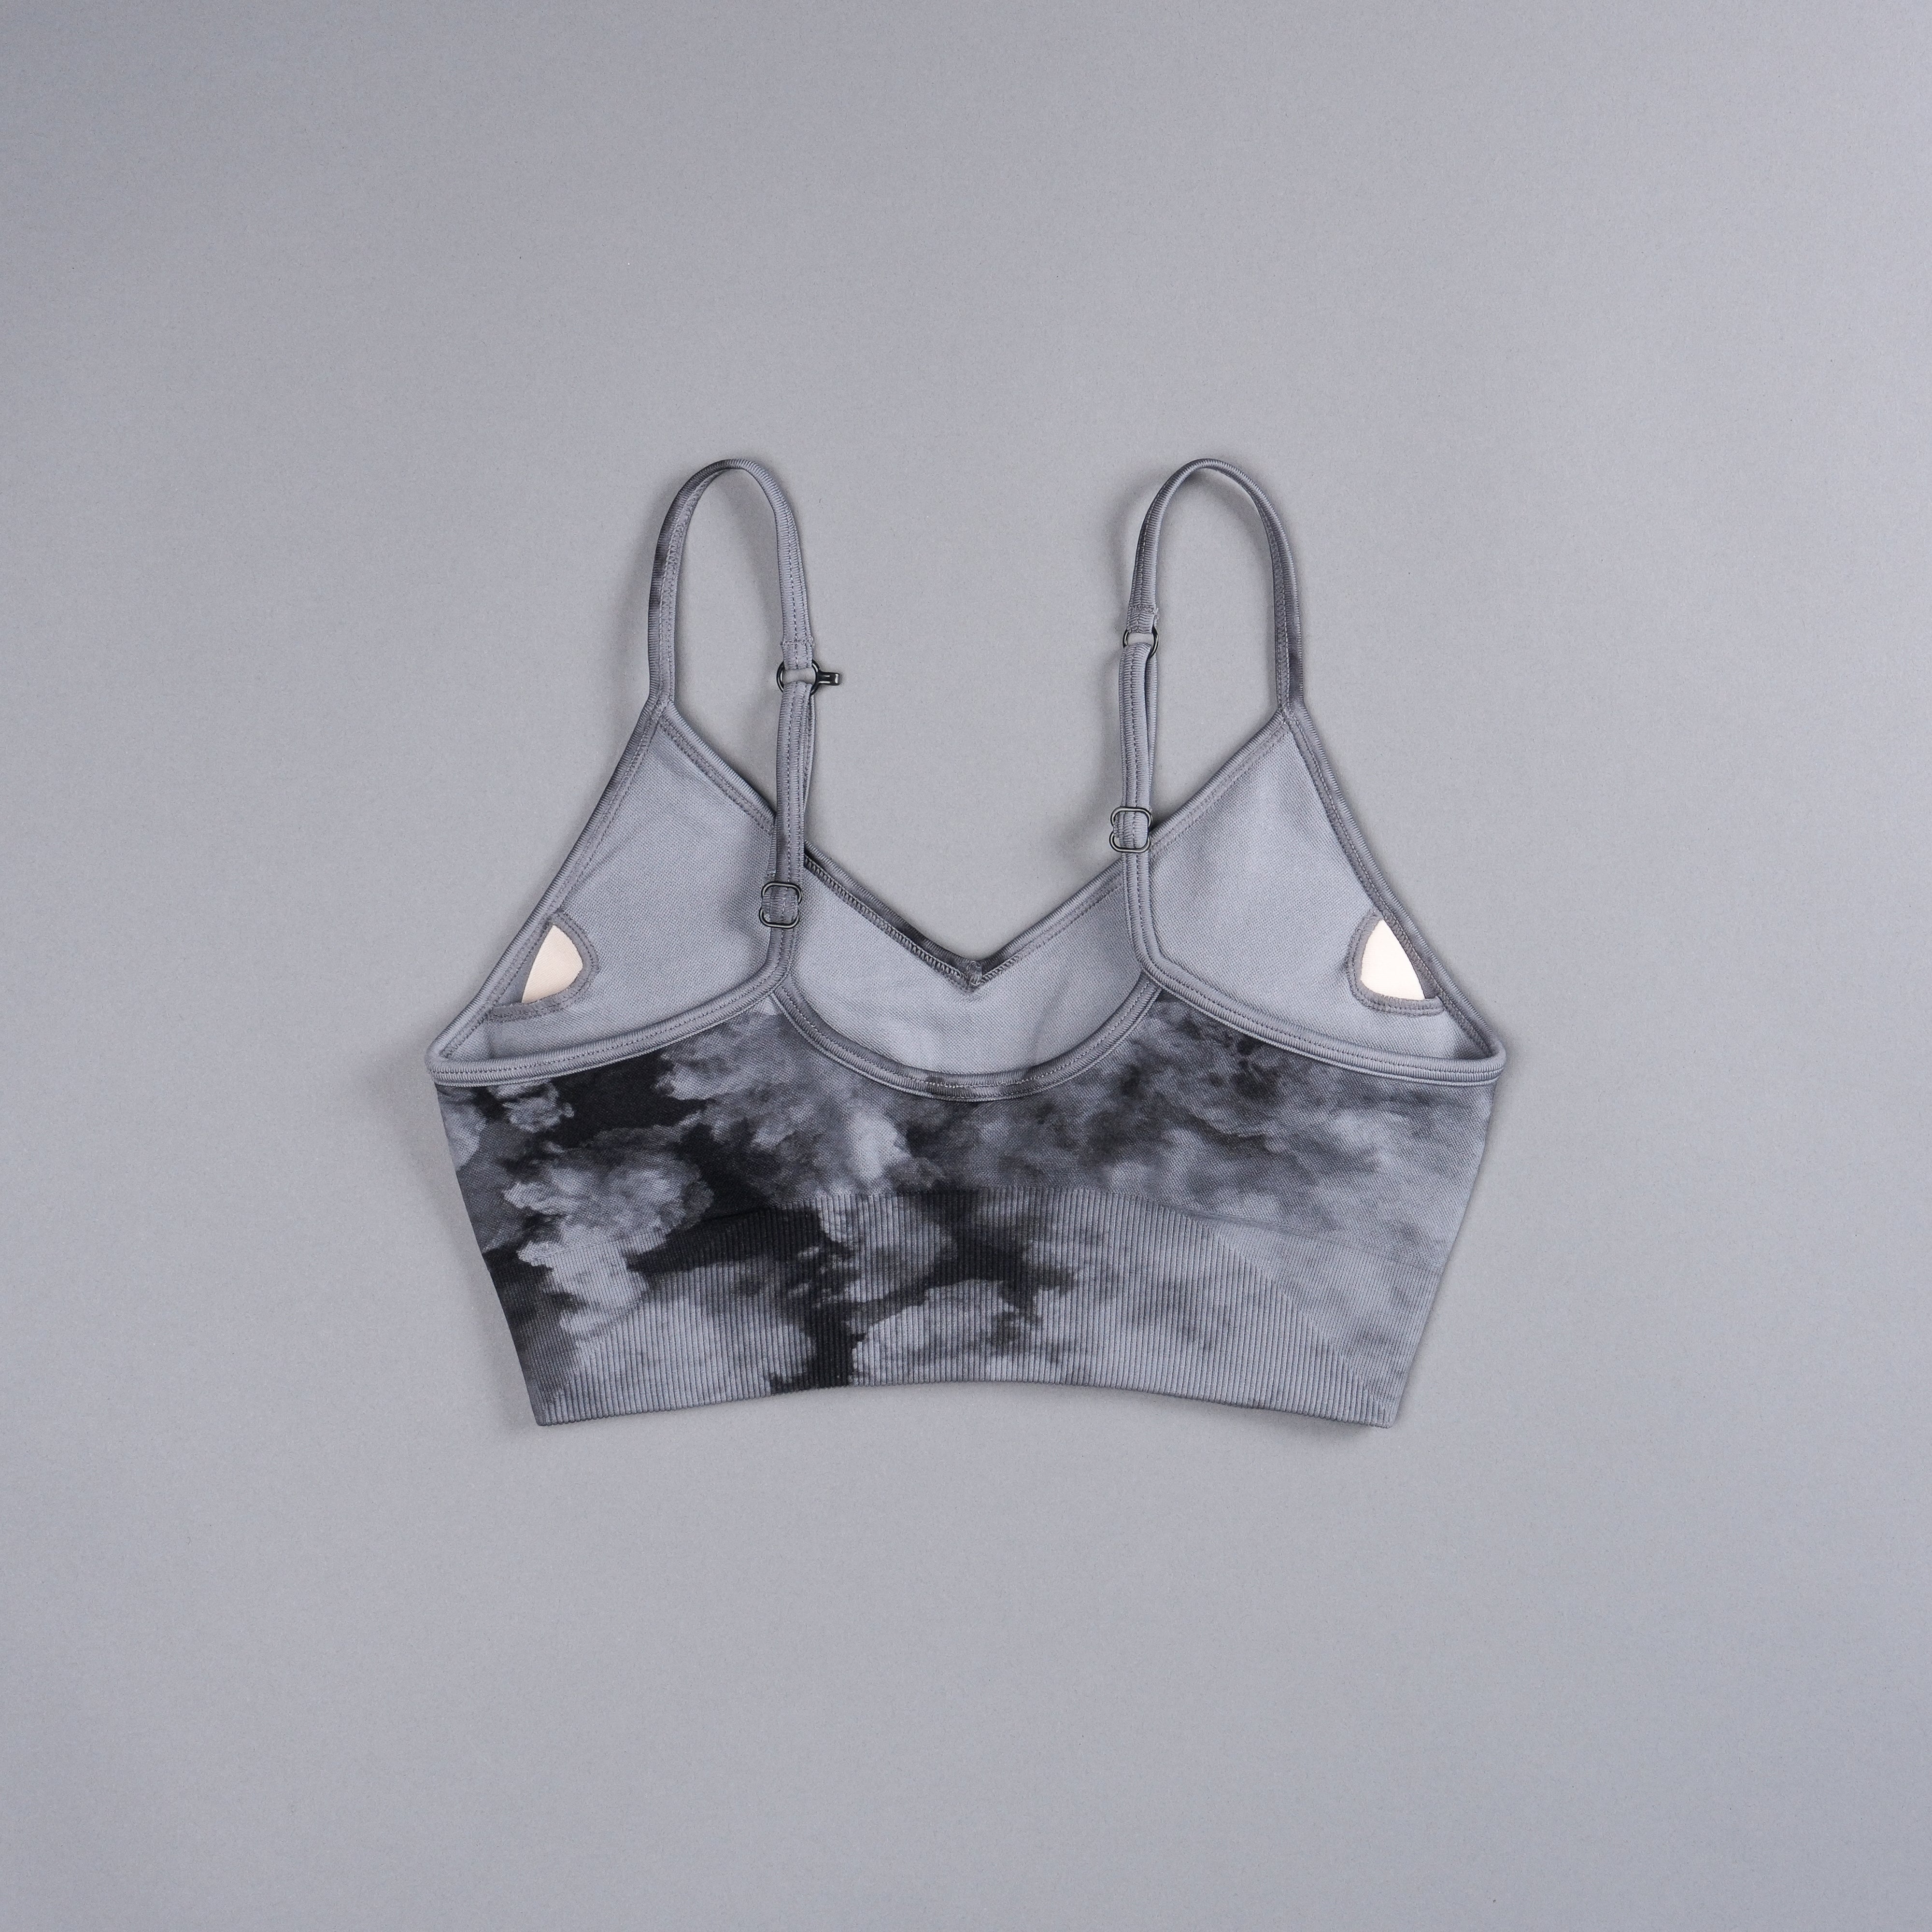 Riders "Everson Seamless" Sports Bra in Black Ghost Clouds